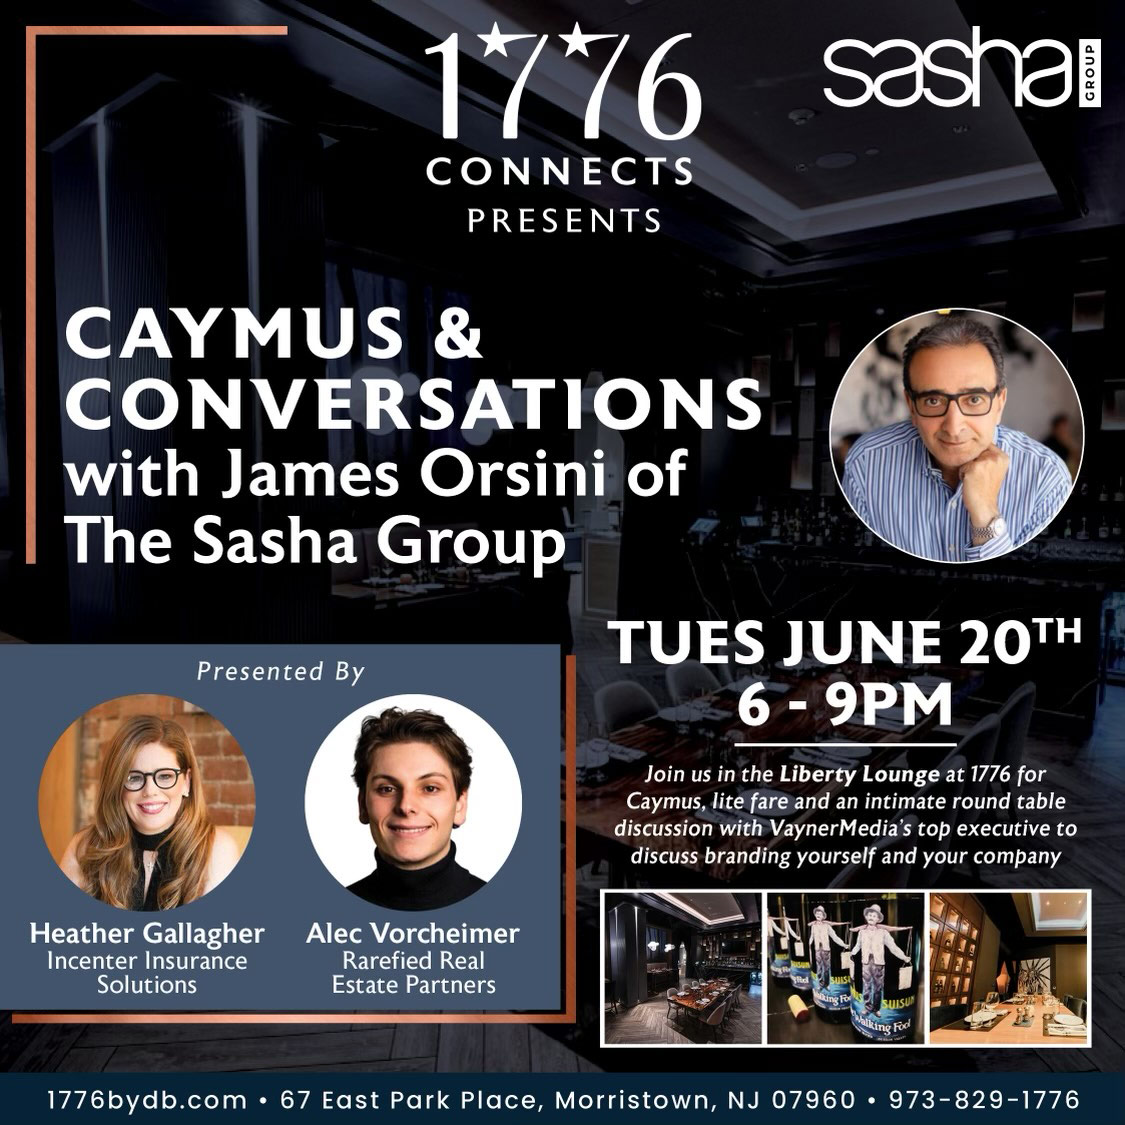 CAYMUS & Conversations with James Orsini of The Sasha Group